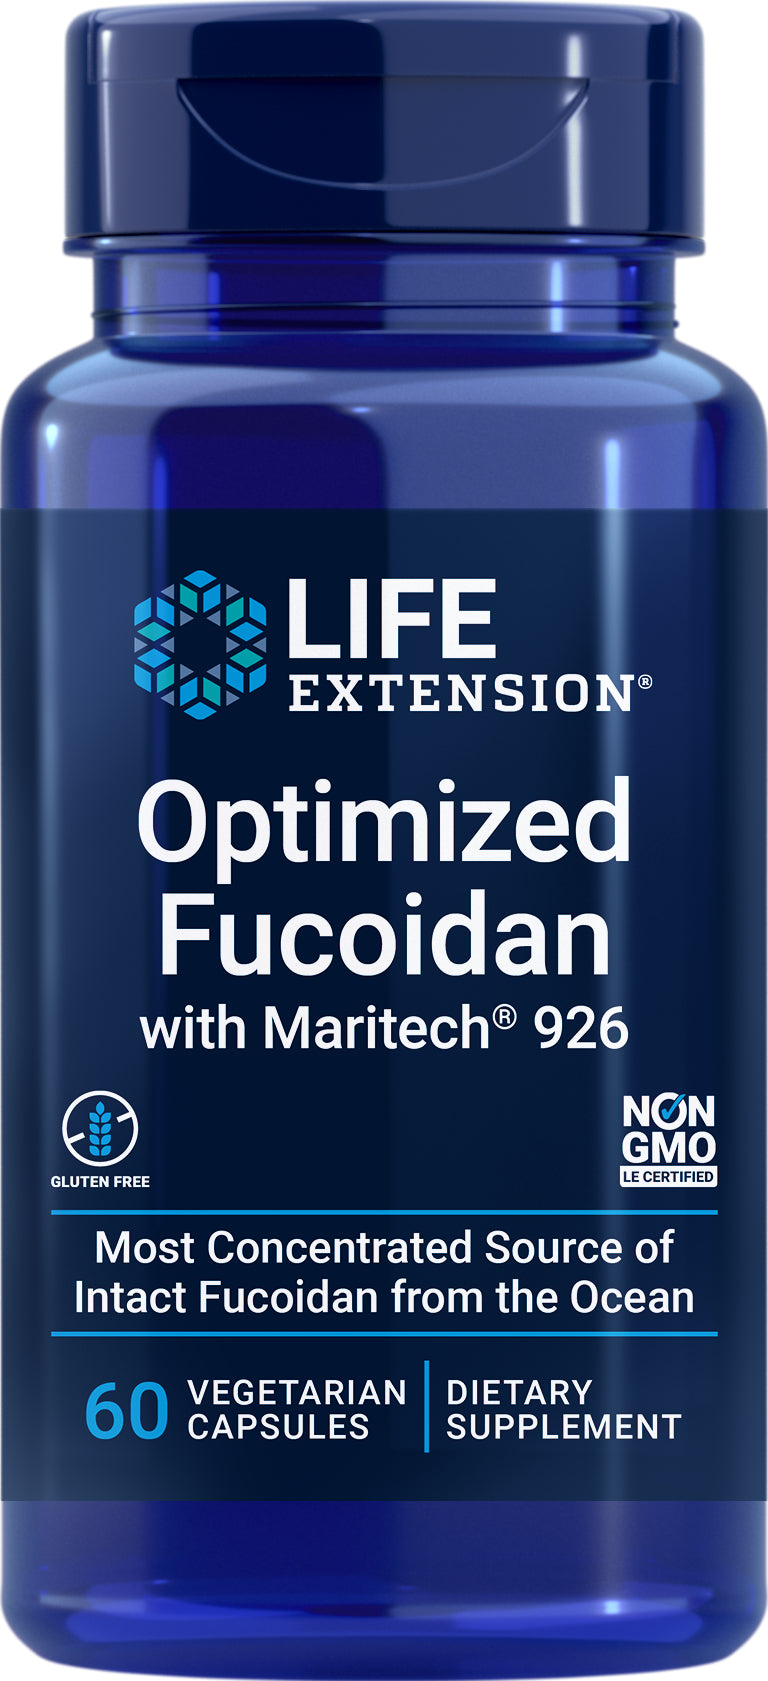 Optimized Fucoidan with Maritech® 926 60 veg caps by Life Extension